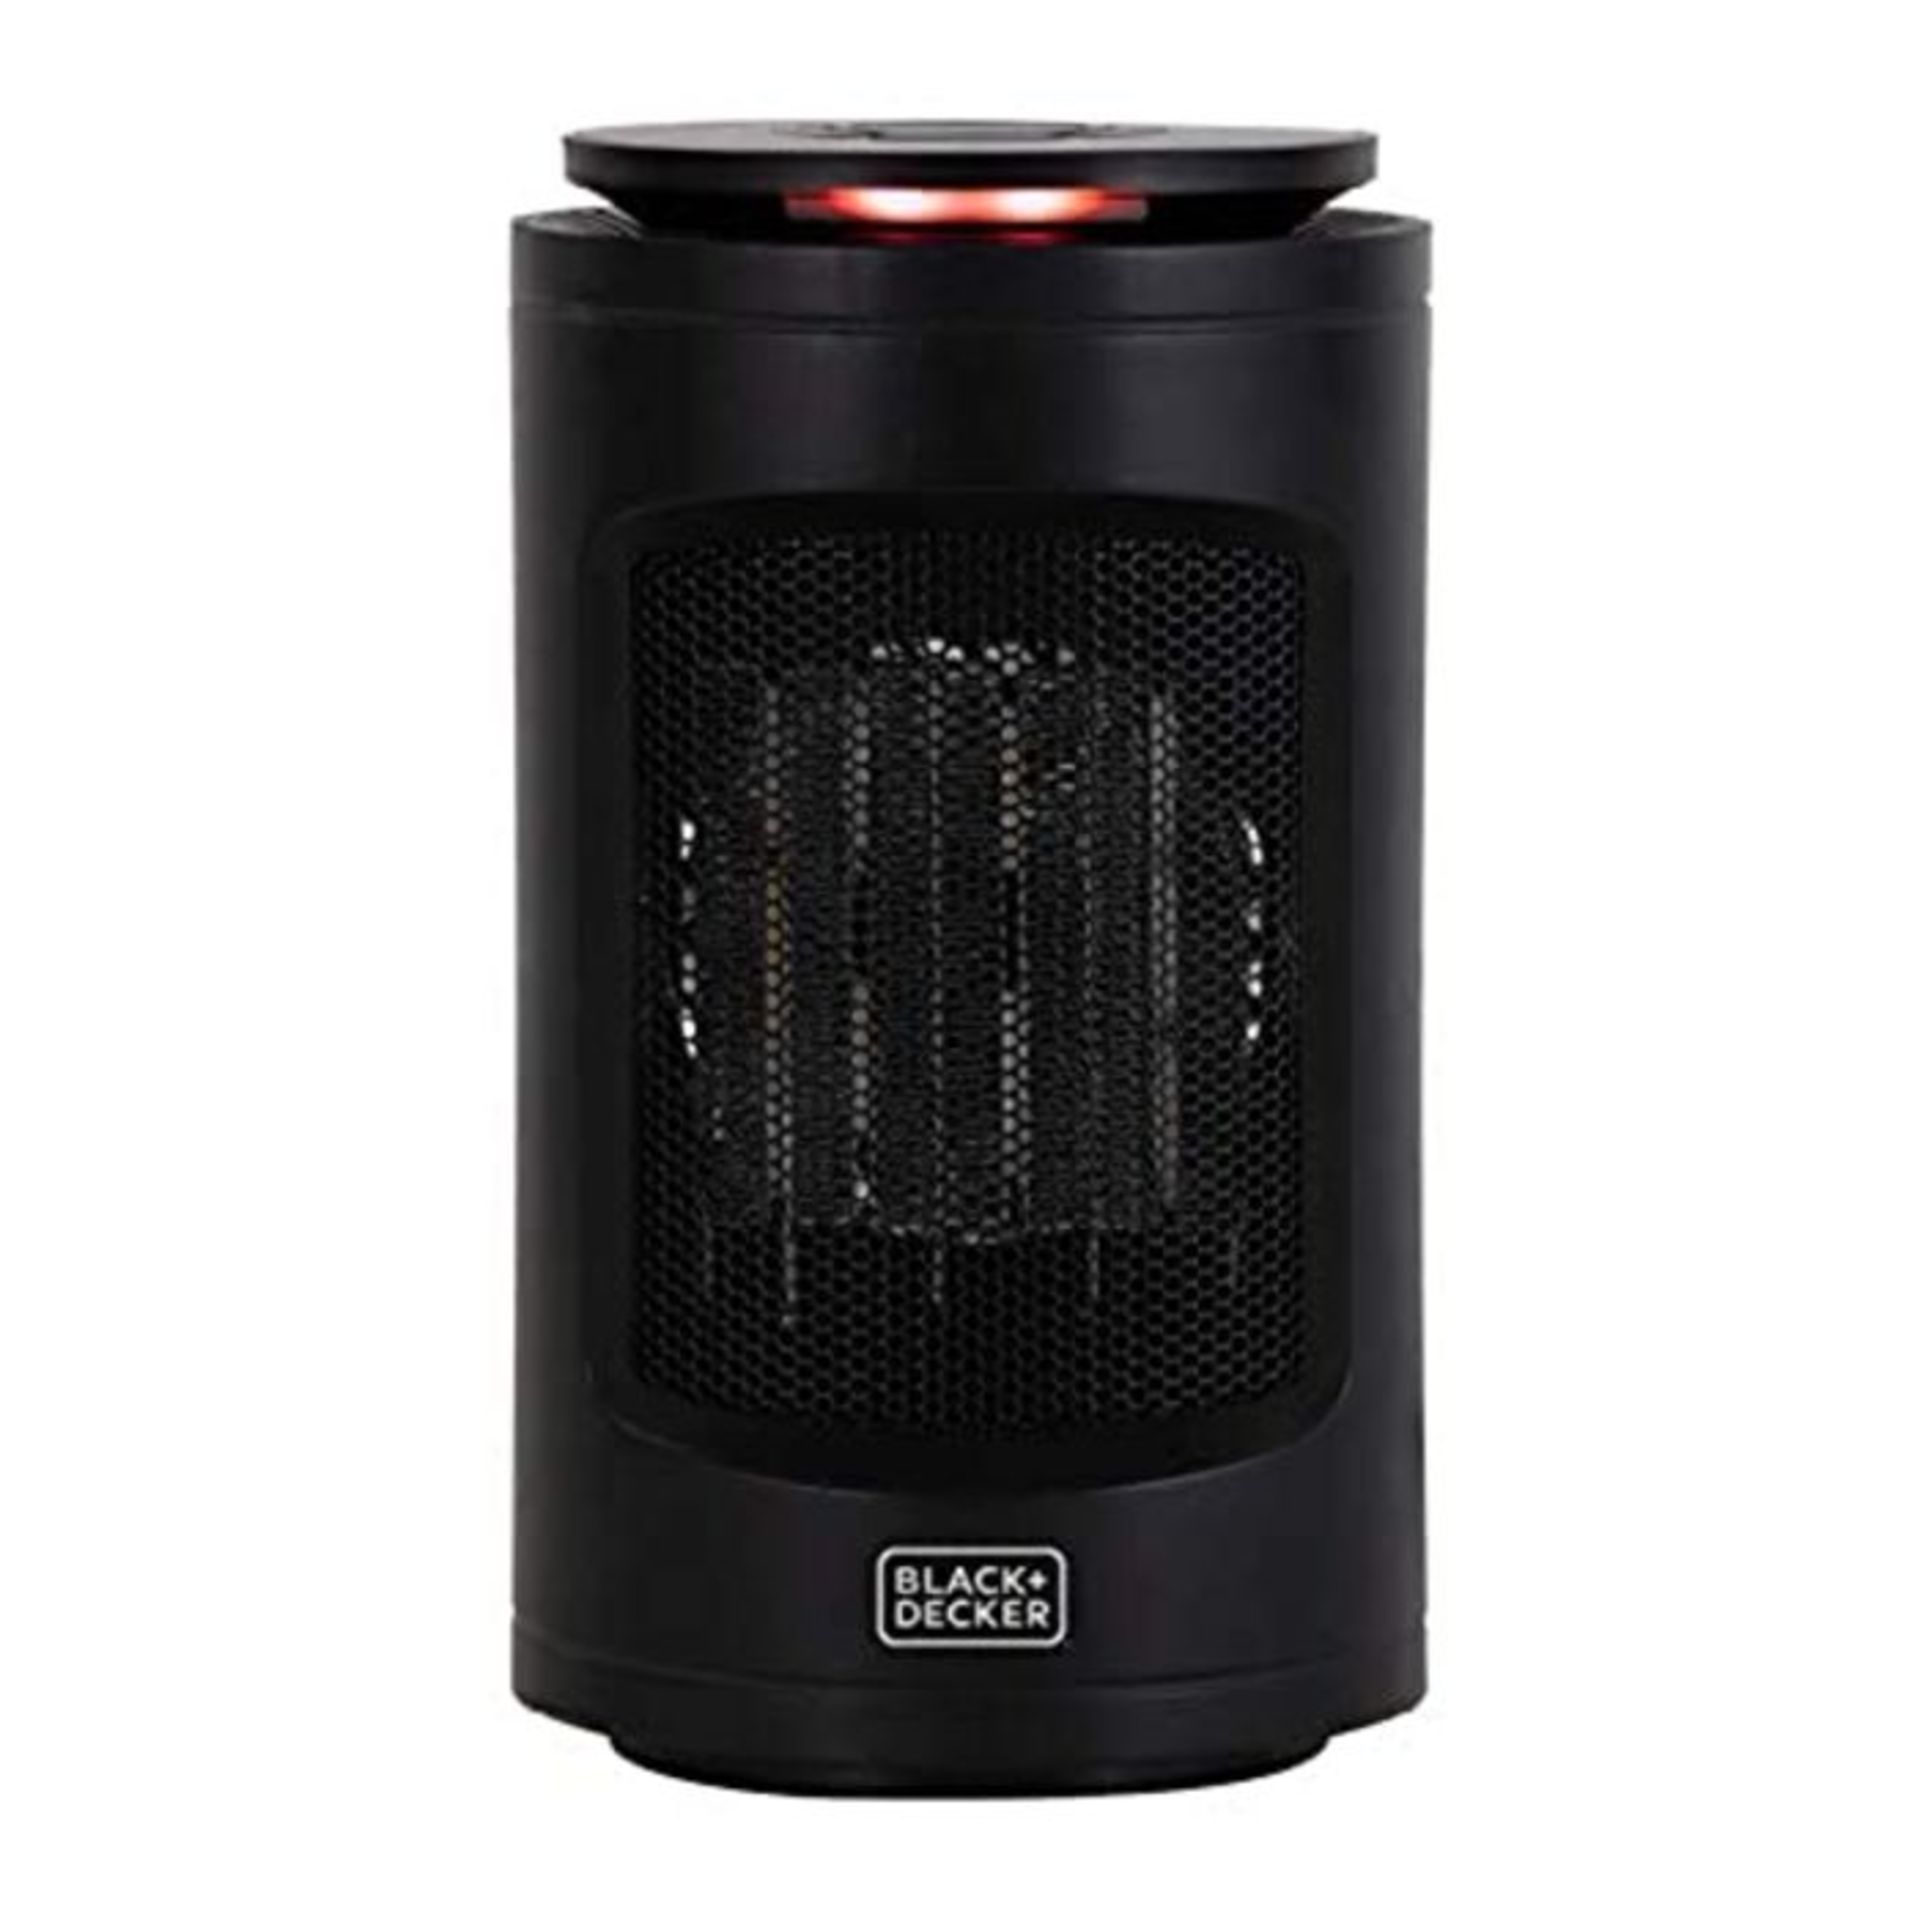 BLACK+DECKER BXSH37013GB Digital Ceramic Tower Heater with Climate Control, 9 Hour Tim - Image 4 of 6